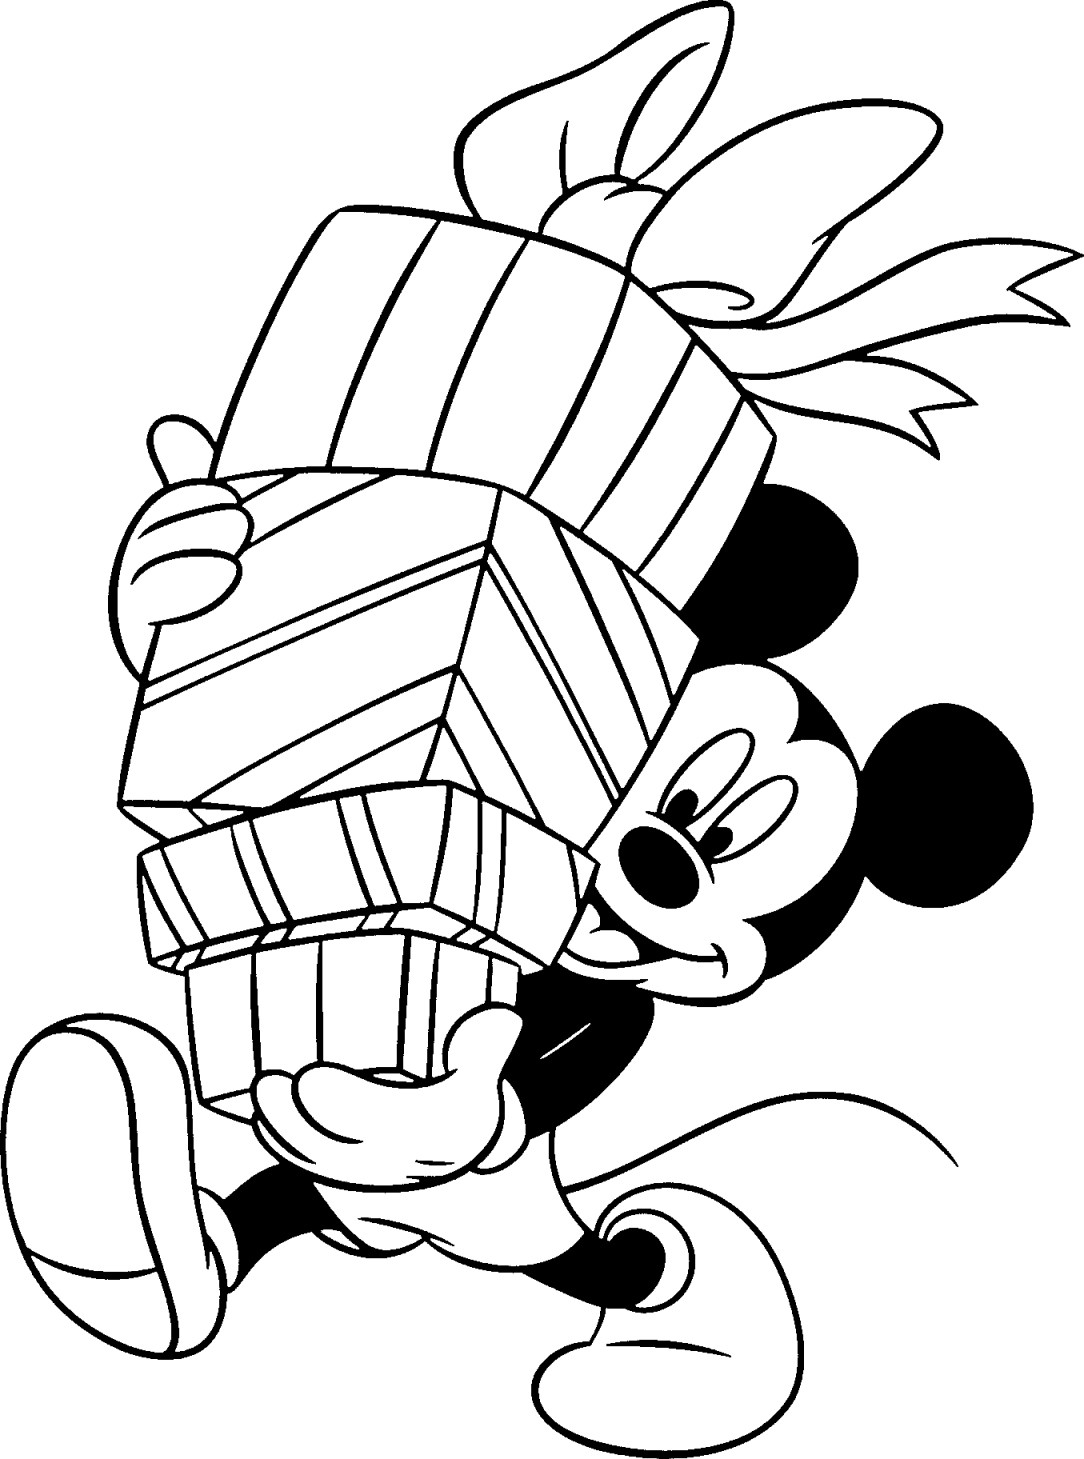 Mickey Mouse Coloring Pages For Toddlers
 DISNEY COLORING PAGES